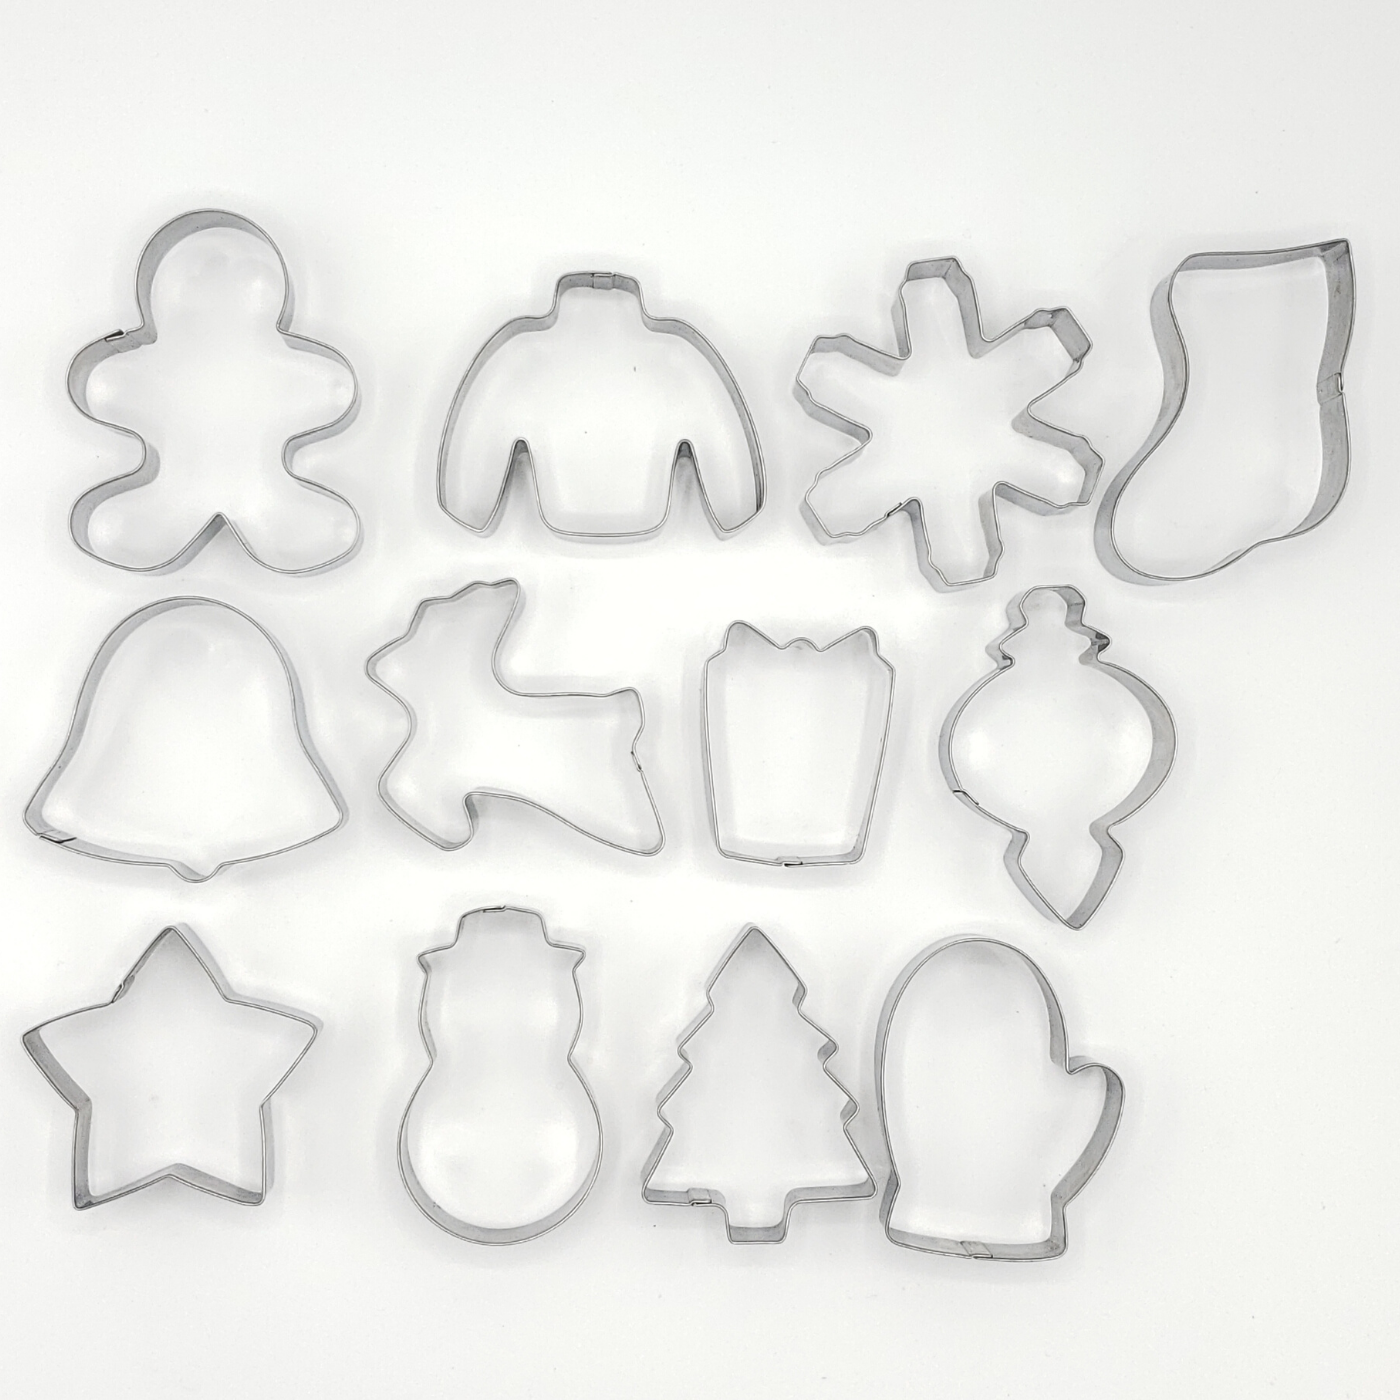 Out of box image of Winter Wonderland Cookie Cutter 12 Piece Boxed Set